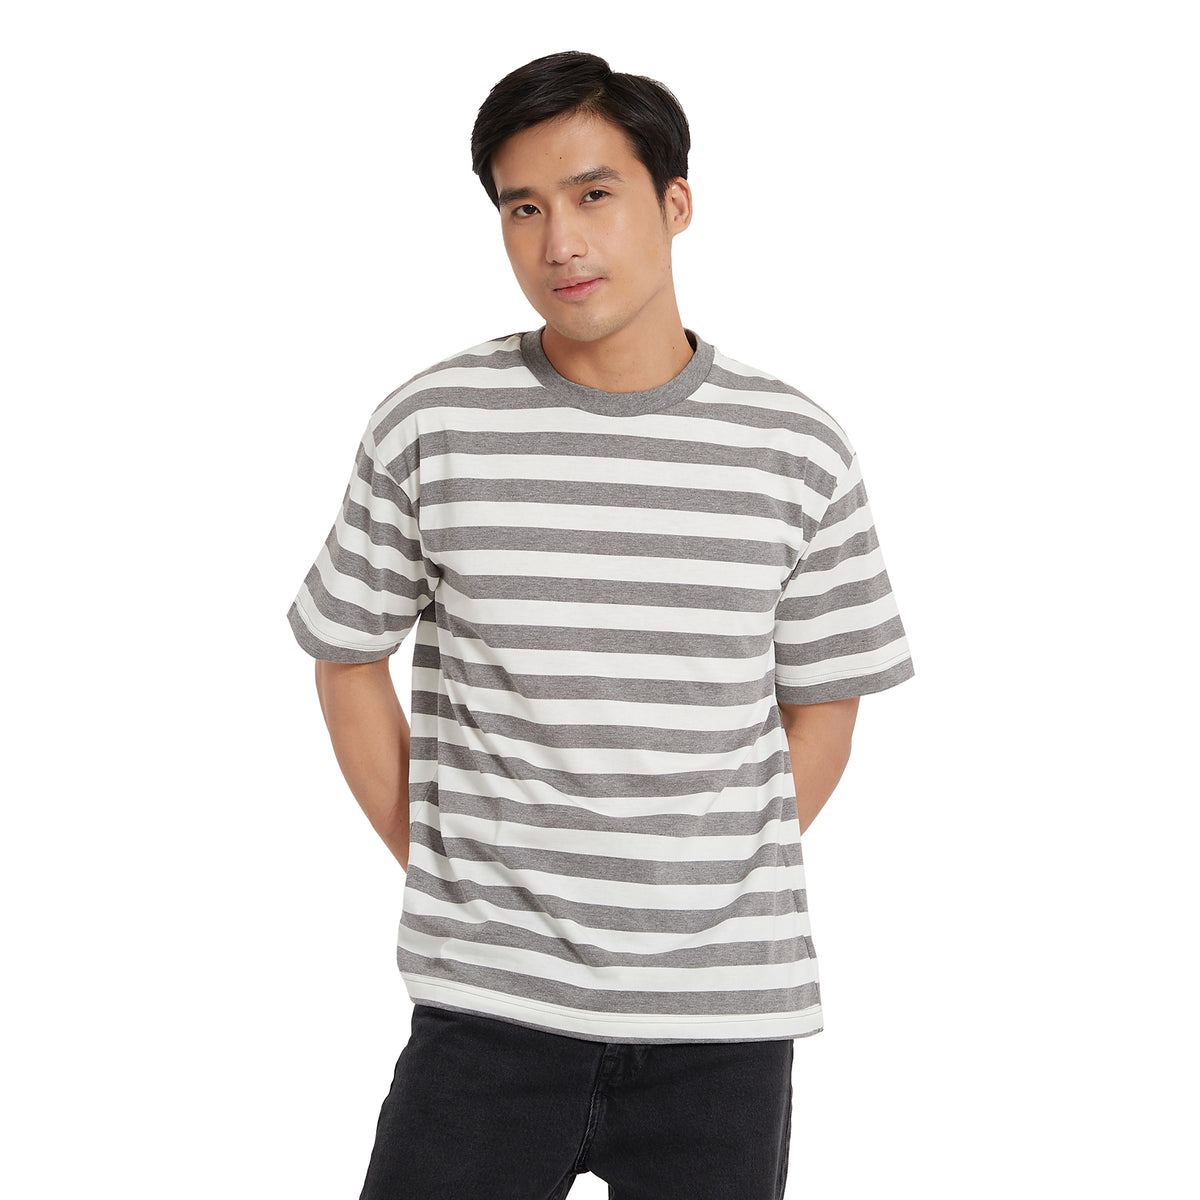 Cubic Men Basic Stripes Oversized Boxy Tee / Box Fit T shirt Top Top for Men - CMBOS03R